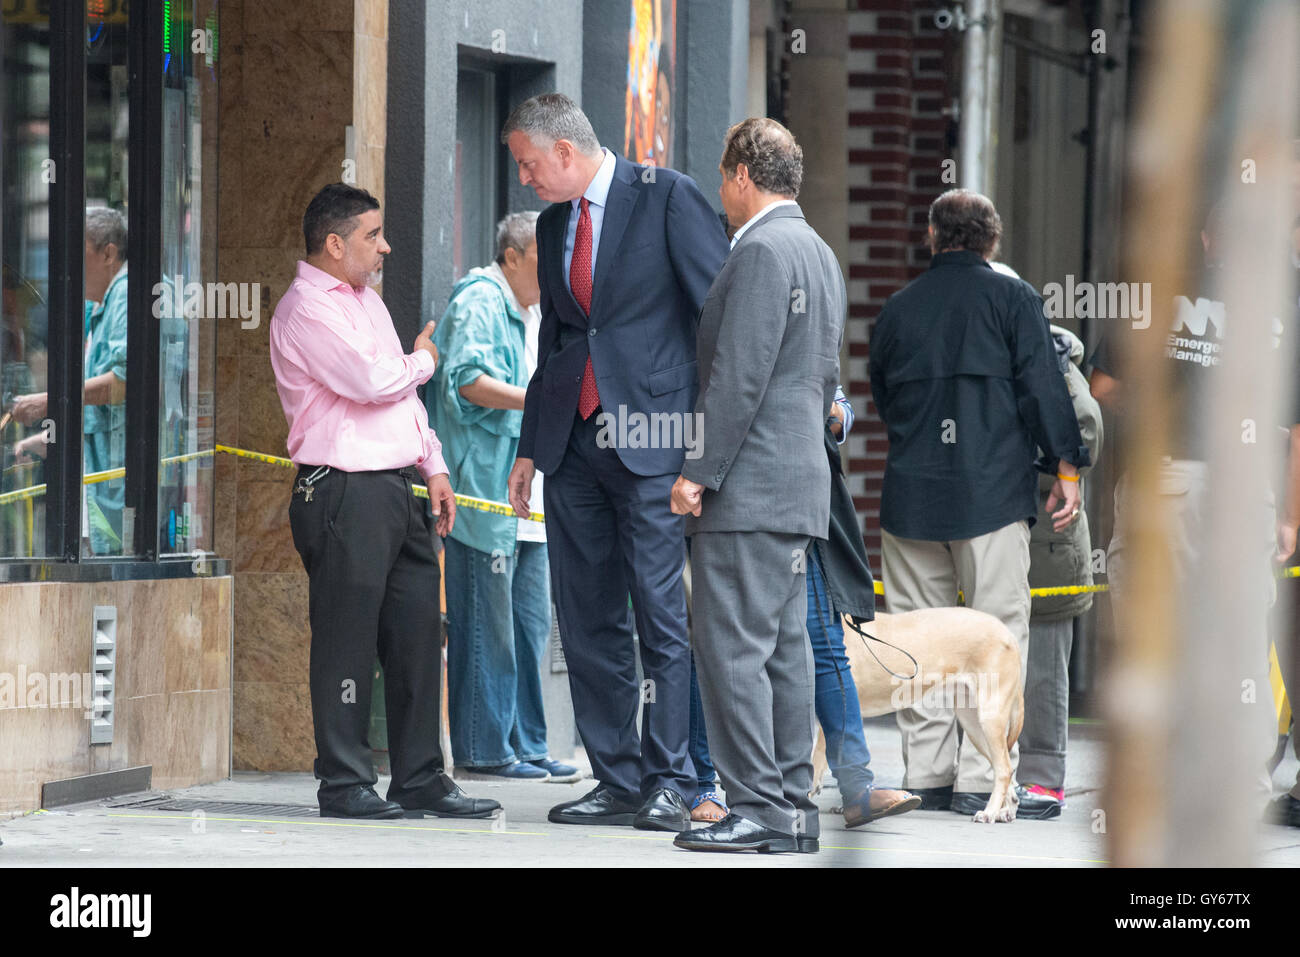 Chelsea, New York, USA. 18th Sept, 2016. New York State Governor Andre Cuomo and New York City Mayor Bill de Blasio toured the site of the bomb explosion on West 23rd Street between Sixth and Seventh Avenues in Manhattan's Chelsea neighborhood, and then stopped at various local businesses to greet proprietors and residents. Credit:  PACIFIC PRESS/Alamy Live News Stock Photo